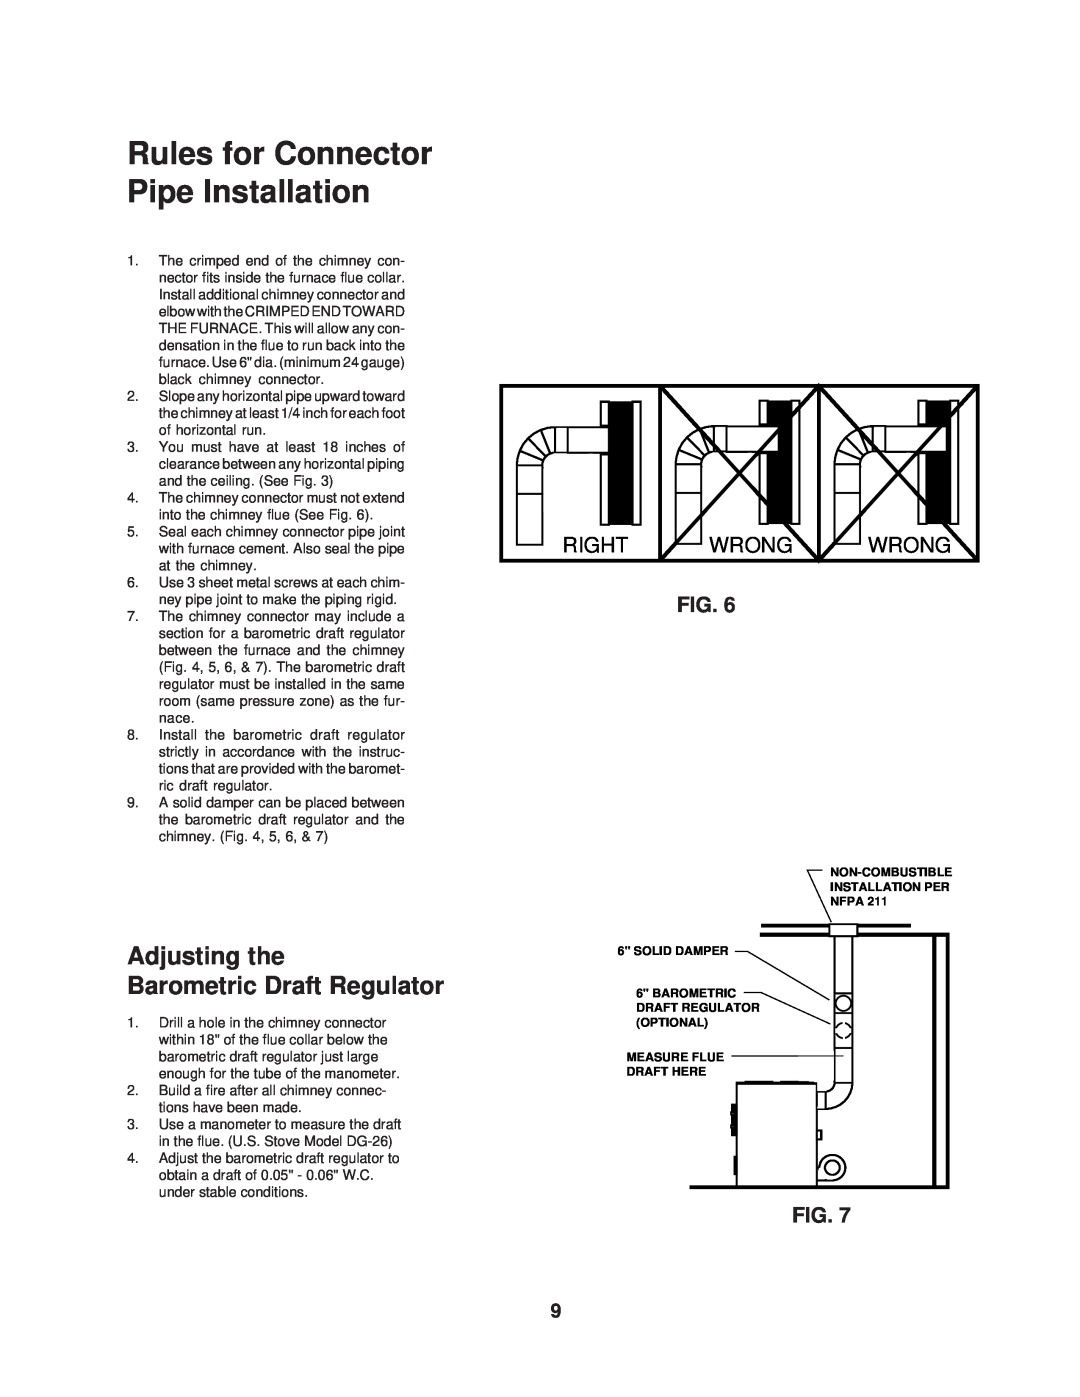 United States Stove 1537Q owner manual Rules for Connector Pipe Installation, Adjusting the Barometric Draft Regulator 